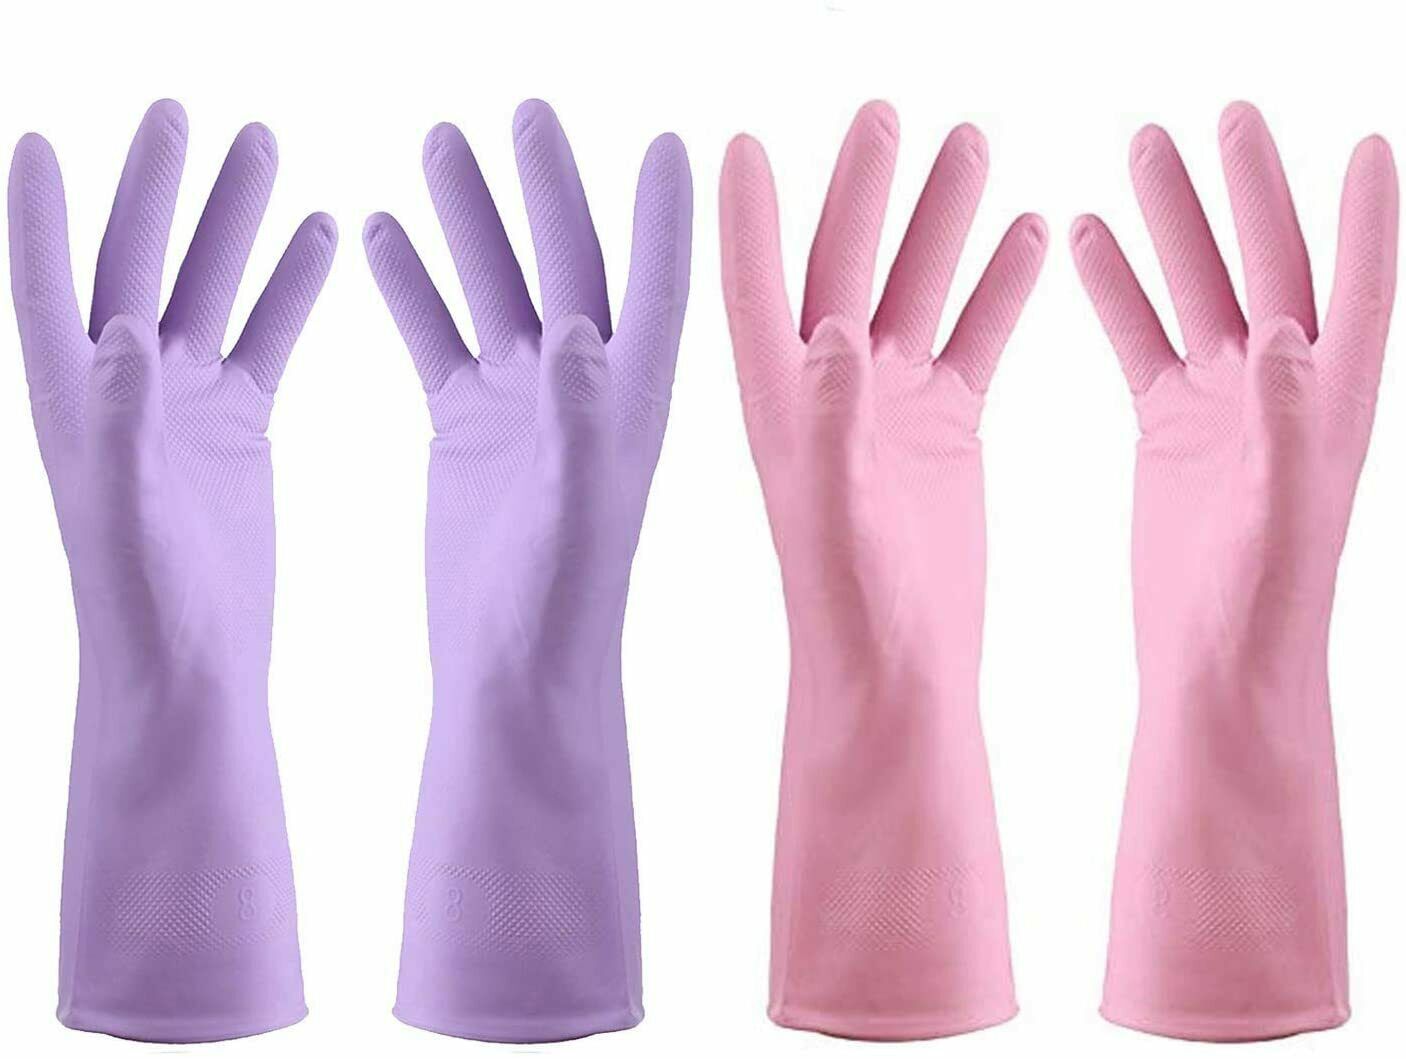 2 Pairs Household Rubber Gloves For Cleaning Dishwashing Gloves Purple Pink M